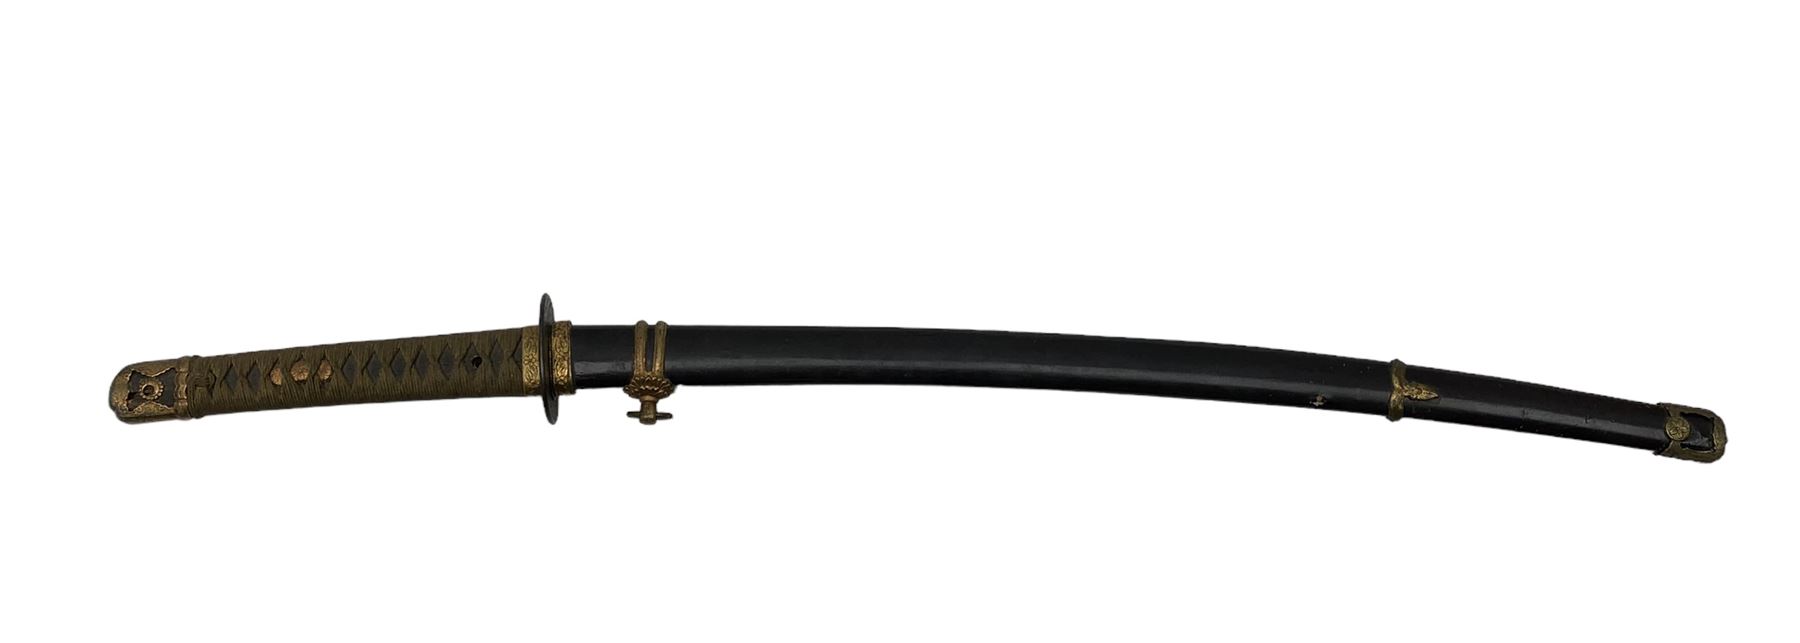 World War II Japanese Katana with cord wound tsuka and military mounts in lacquered scabbard - Image 3 of 10